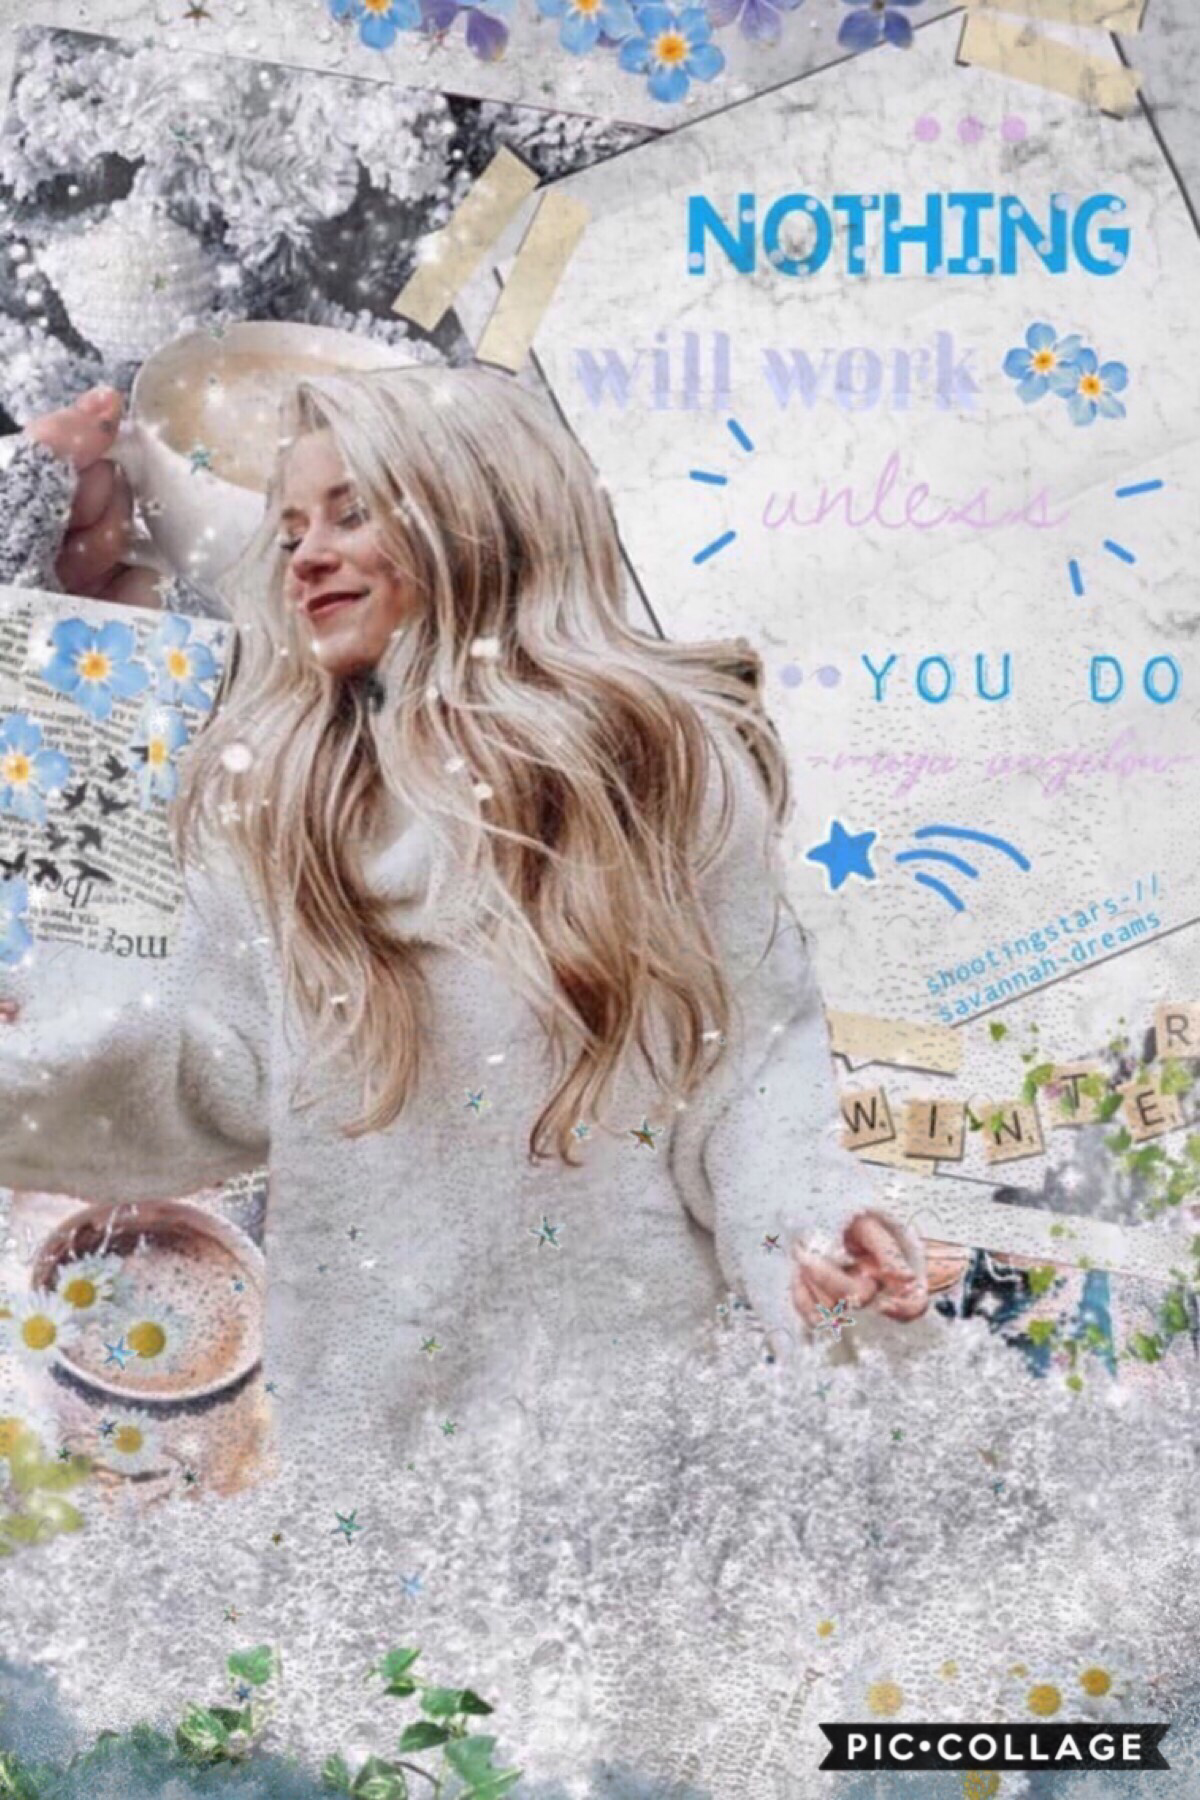 ❄️collab with.. tap❄️
savannah-dreams!! Omg savvy is so talented y’all have to follow her!!💓✨i did bg and she did text!! The bg looks so terrible lol, what’s up everyone? Omg school ends in two weeks and I’m so happy!!✨🥳hehe anyway hope you guys have a gr